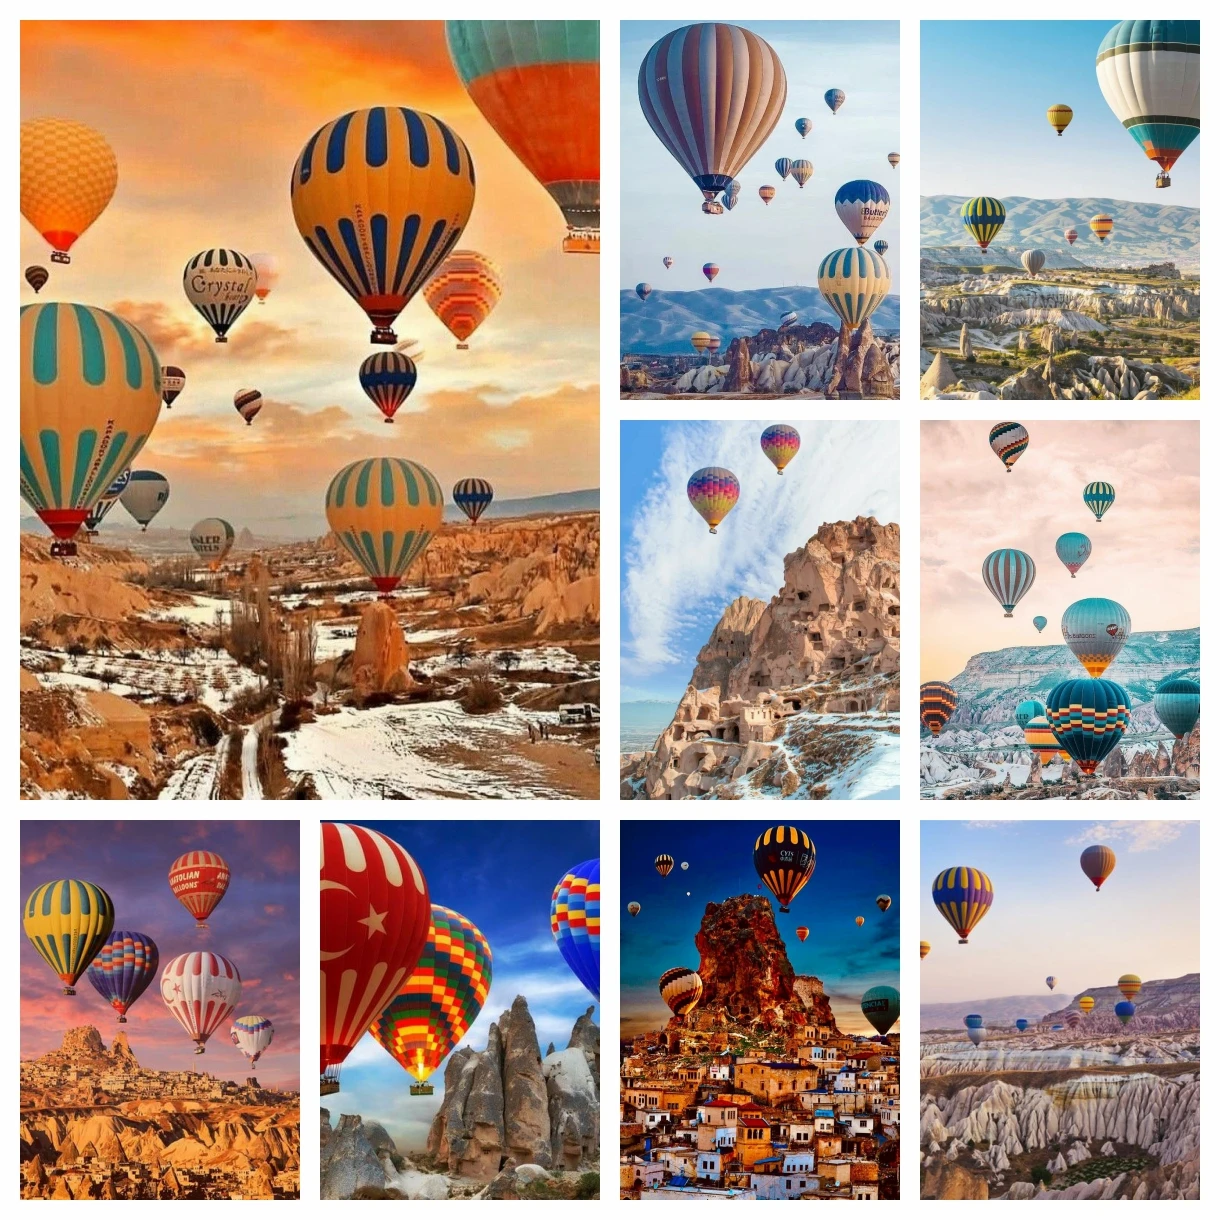 Sunset Landsacape 5d Diamond Painting Hot Balloon Art Kits Pictures Full Drill Mosaic Embroidered Cross Stitch Home Decor Gift